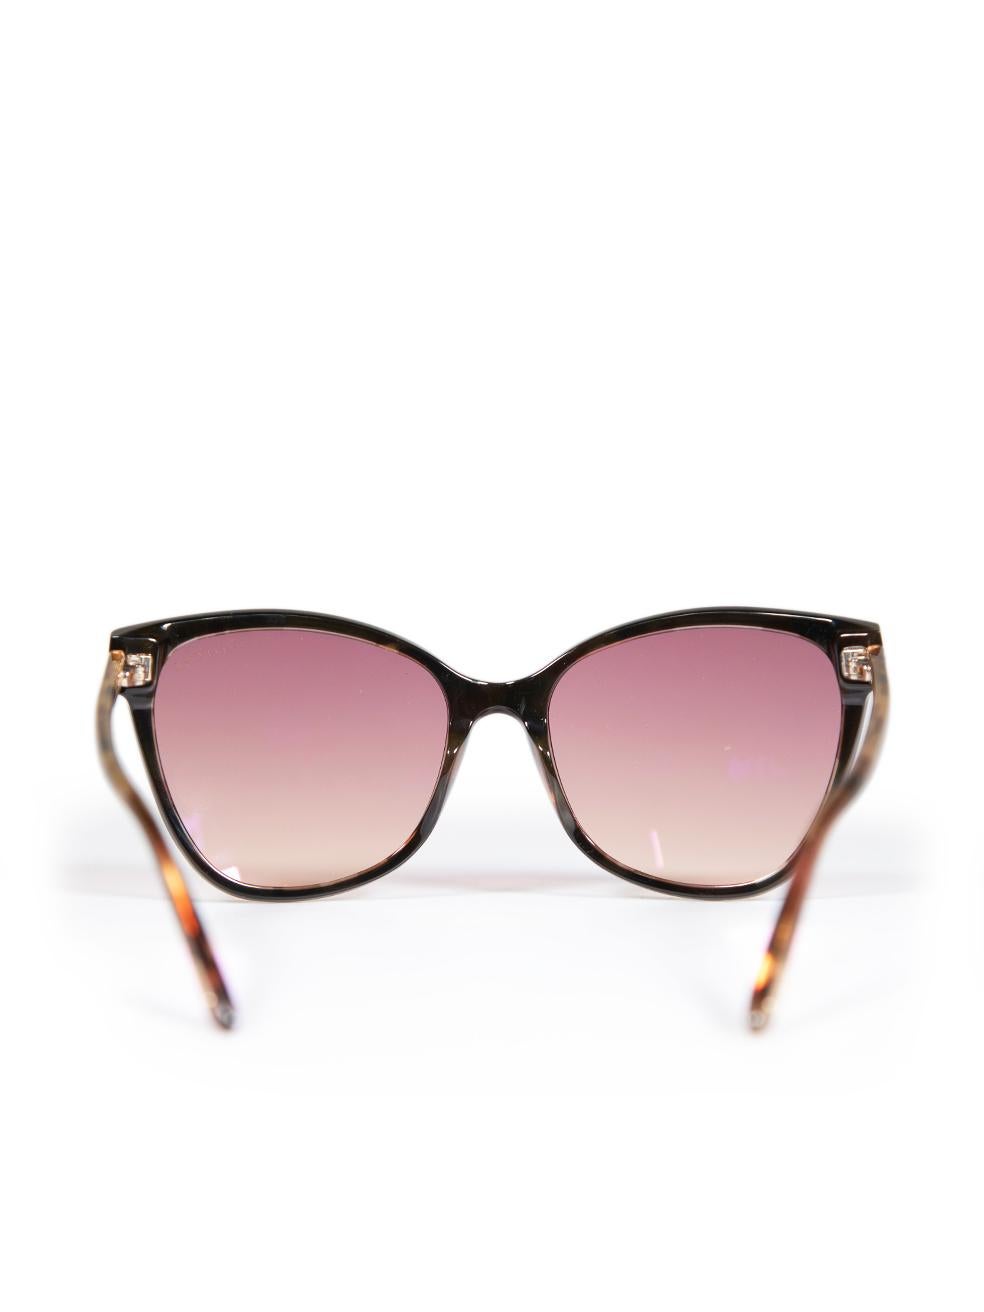 Women's Tom Ford Ani Pink Gradient Cat Eye Sunglasses For Sale